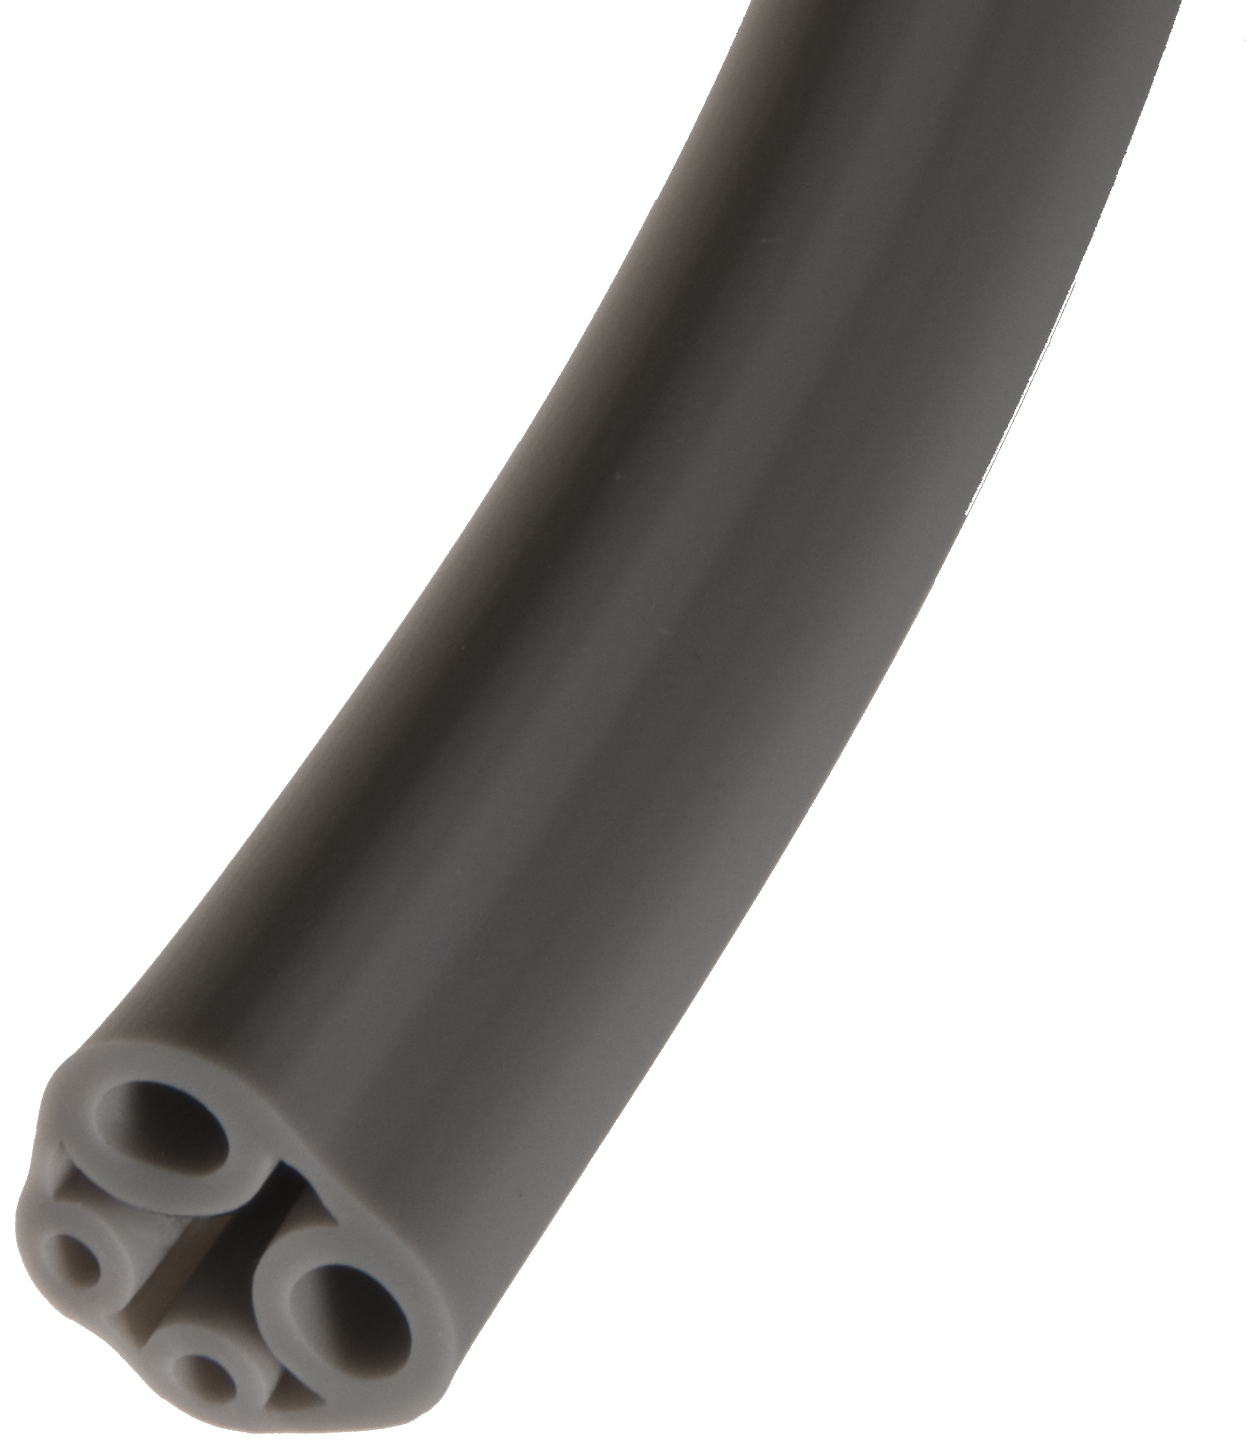 What are some styles of tubing connectors?